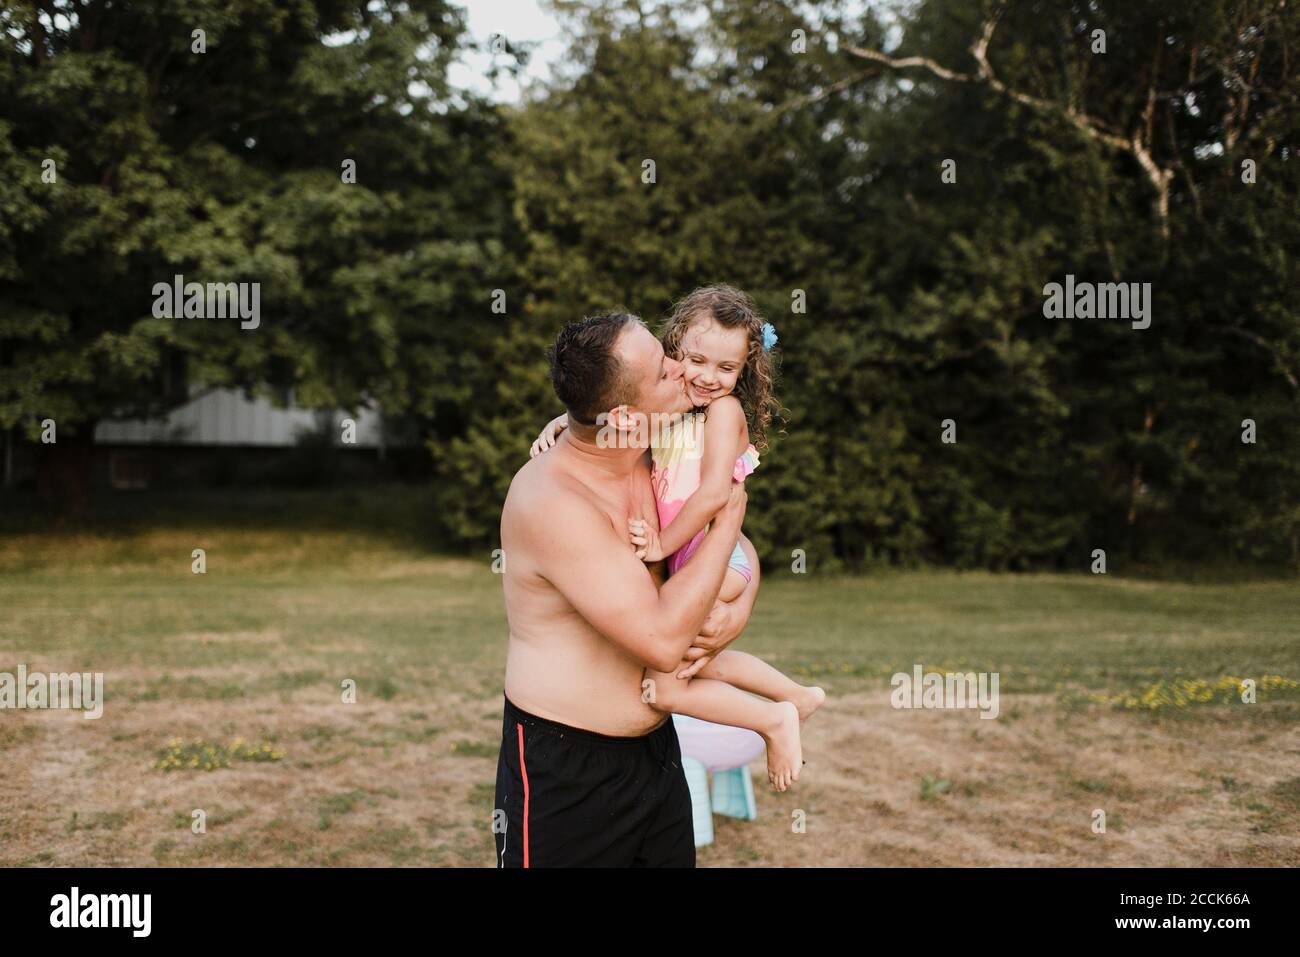 Father wearing swimming trunks carrying and kissing little daughter on a meadow Stock Photo